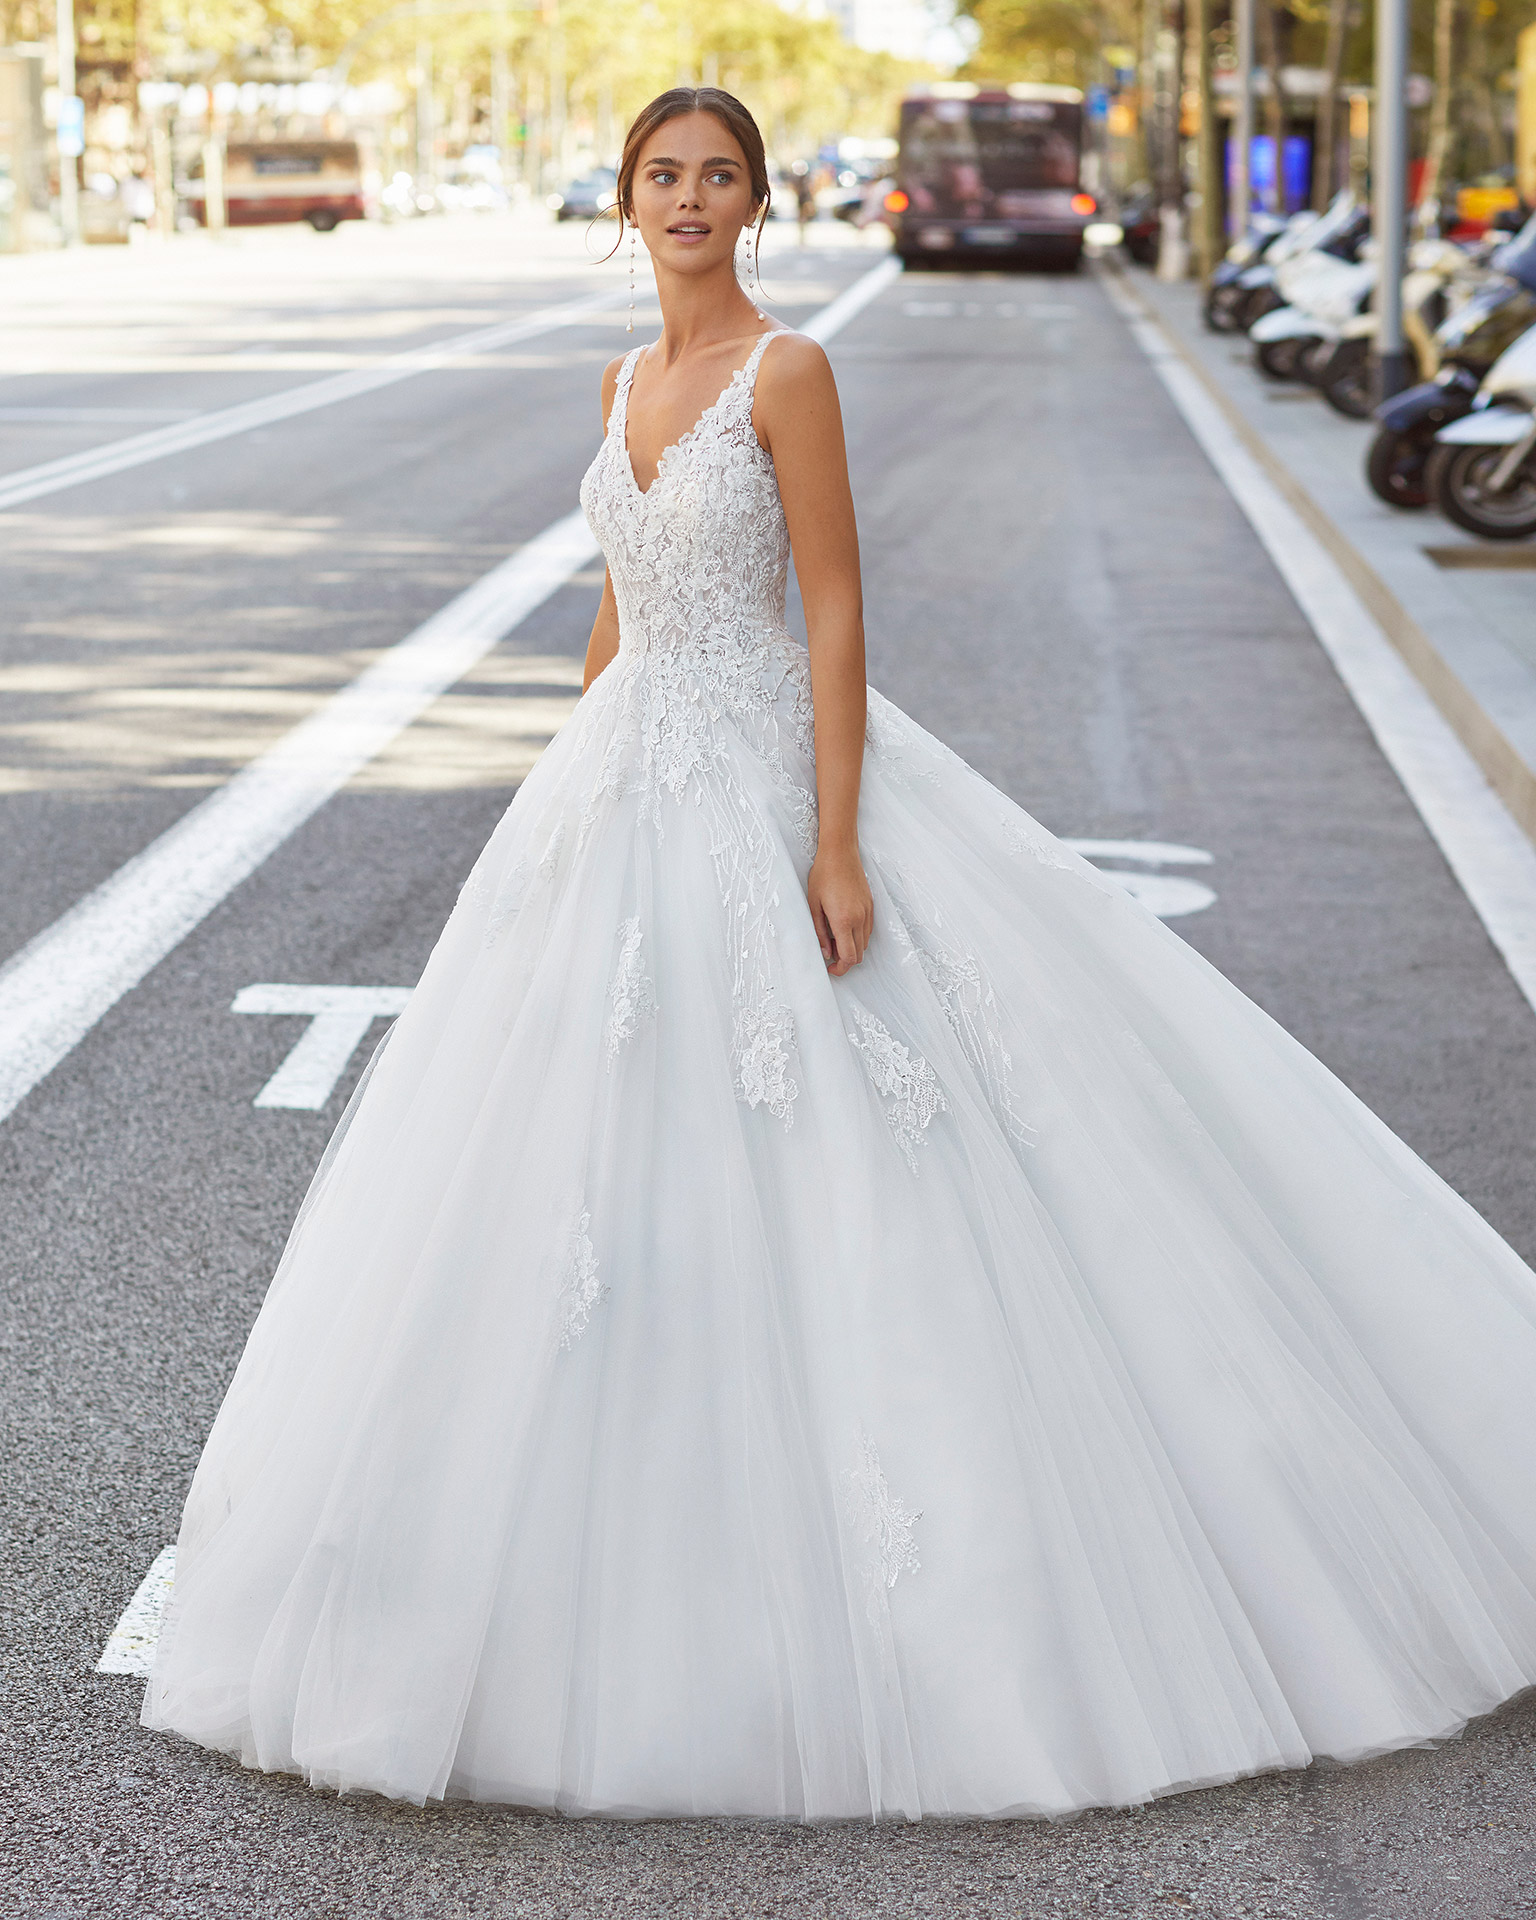 Princess-style wedding dress in beaded lace and tulle. Neckline and low back. 2021  Collection.